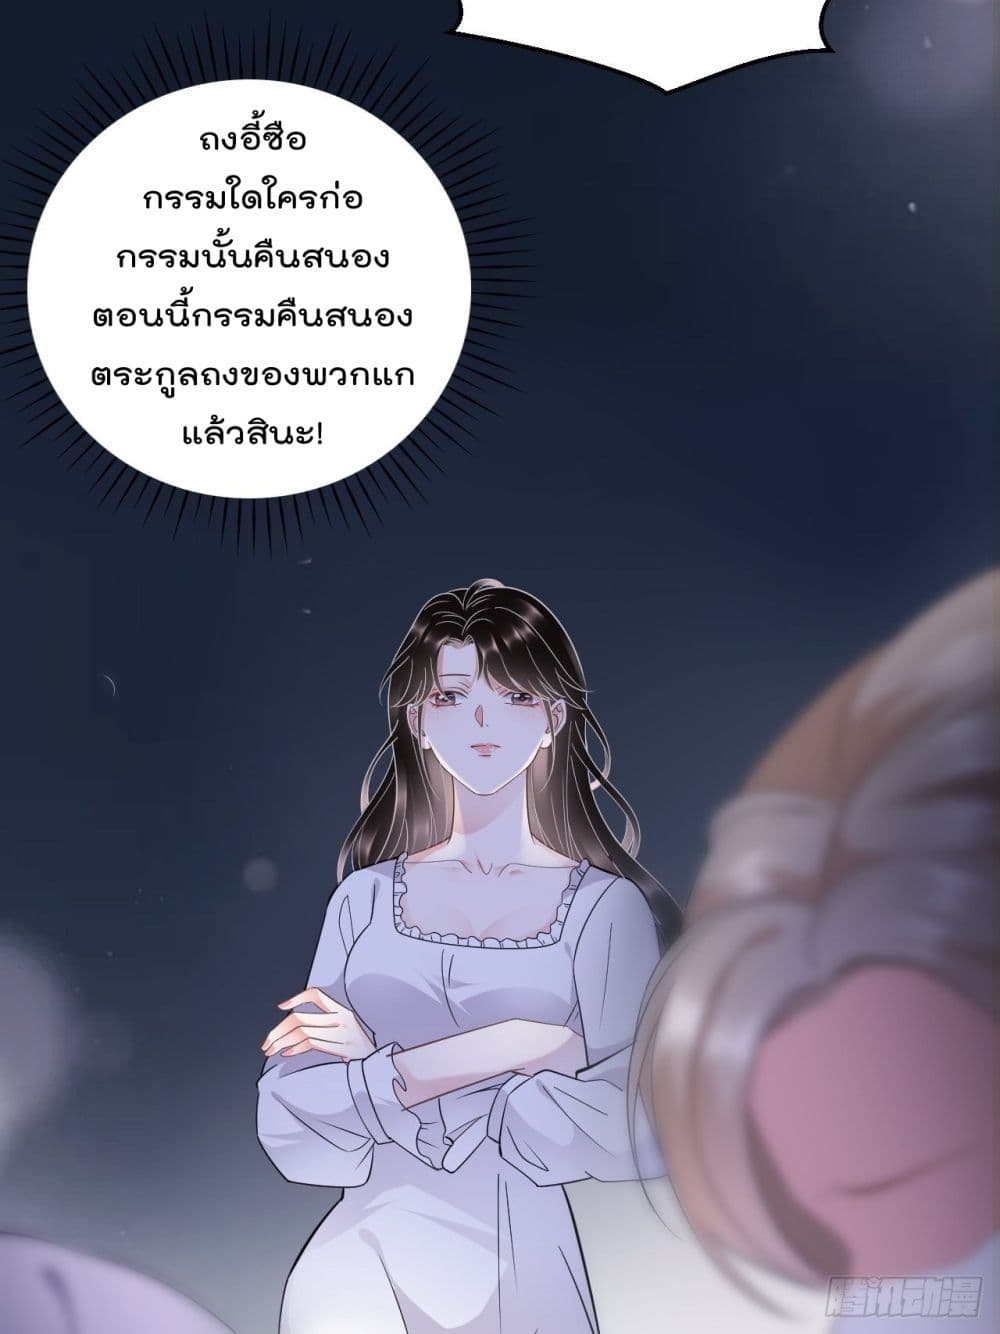 What Can the Eldest Lady Have คุณหนูใหญ่ ทำไมคุณร้ายอย่างนี้ 14-14